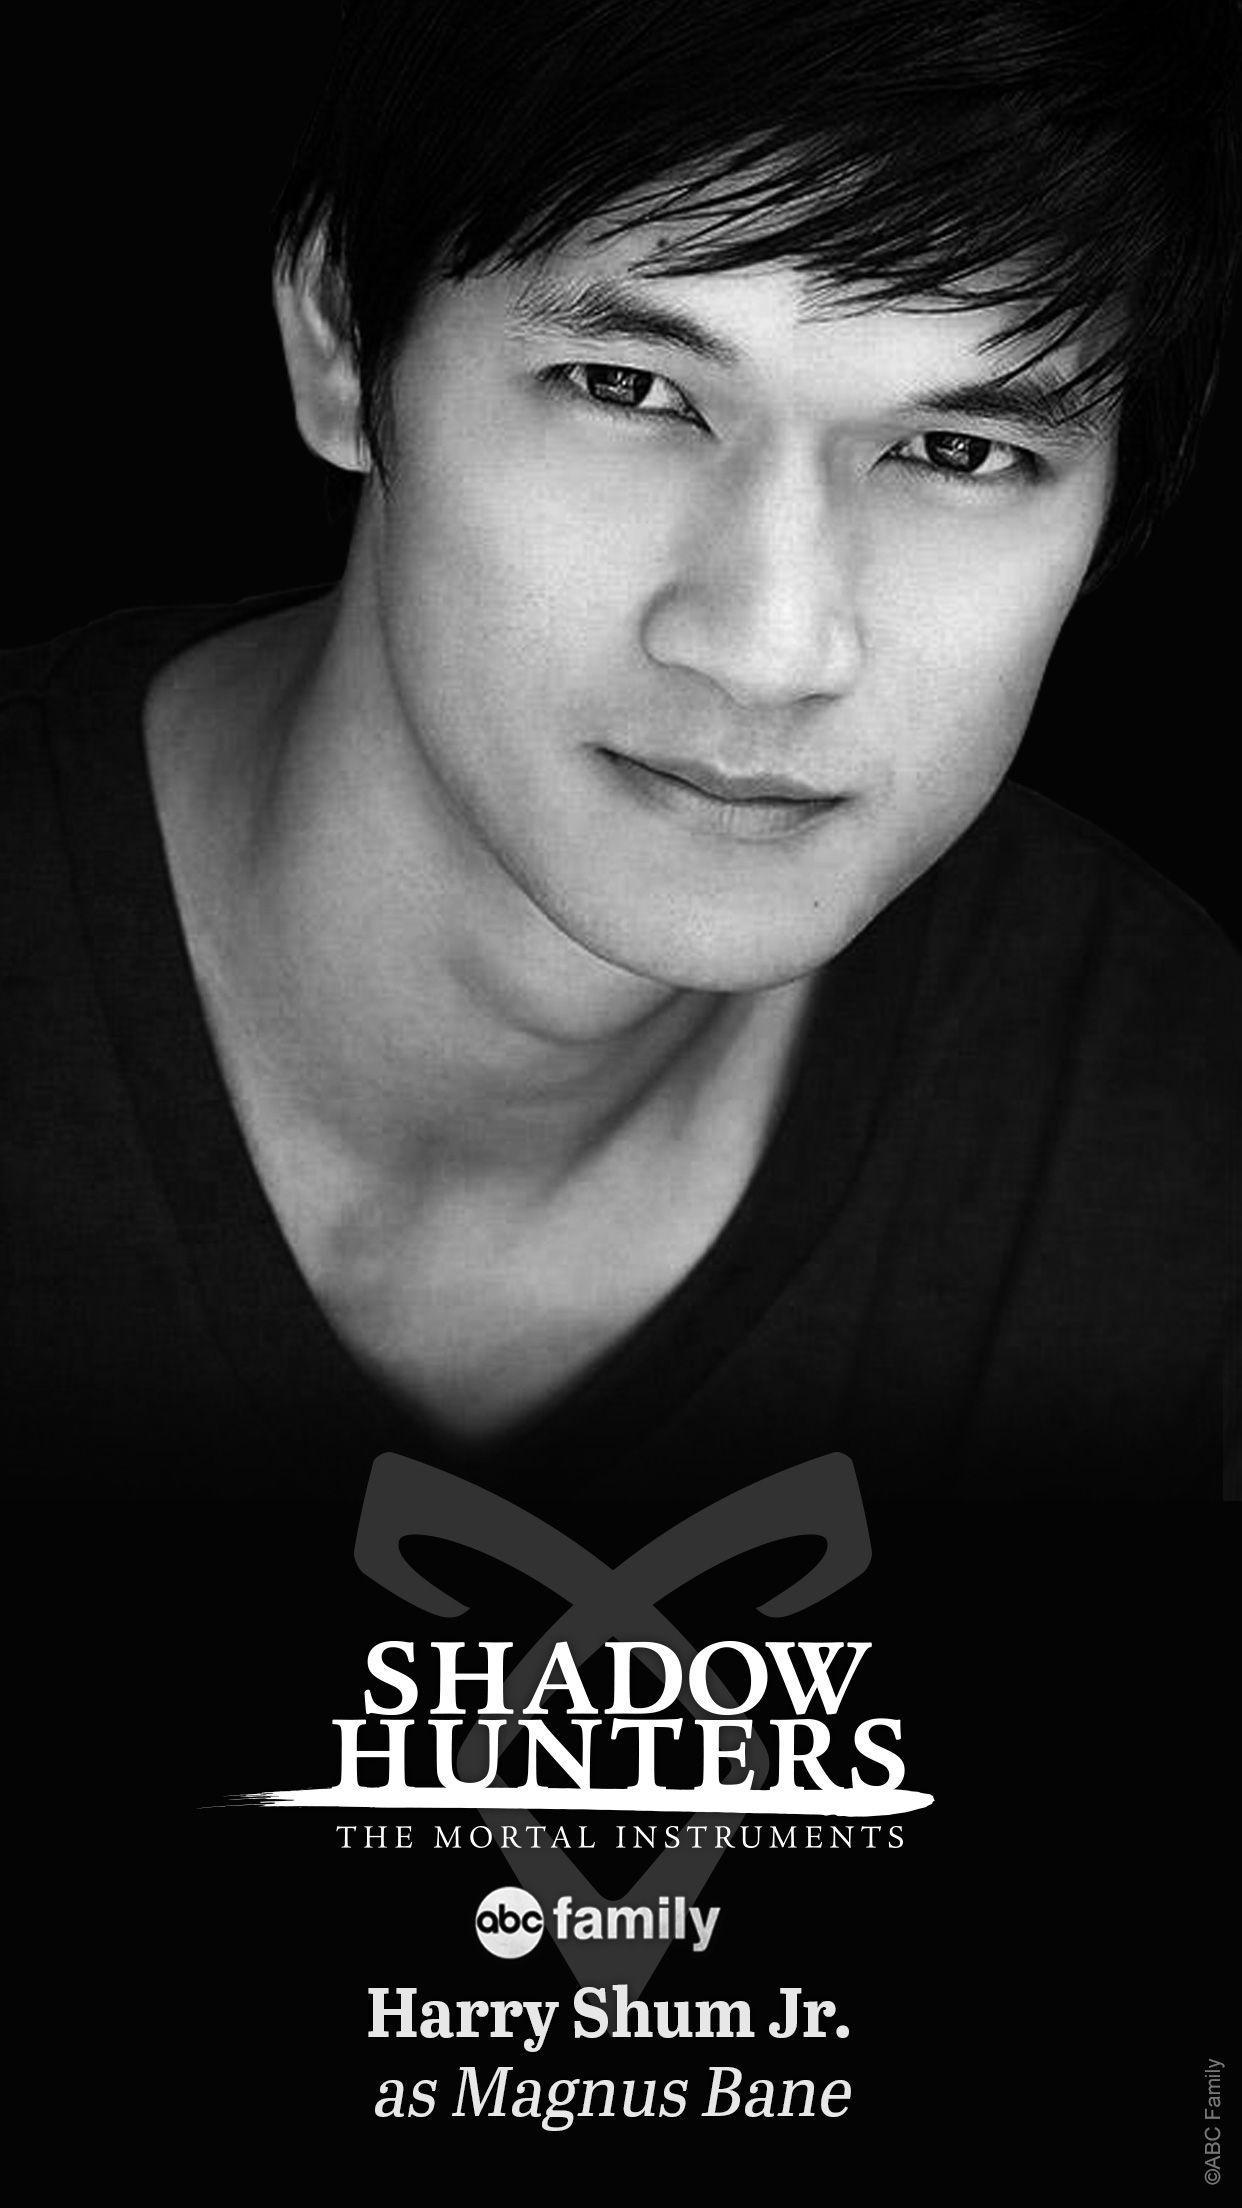 Shadowhunters Mobile Background to Rock Your World